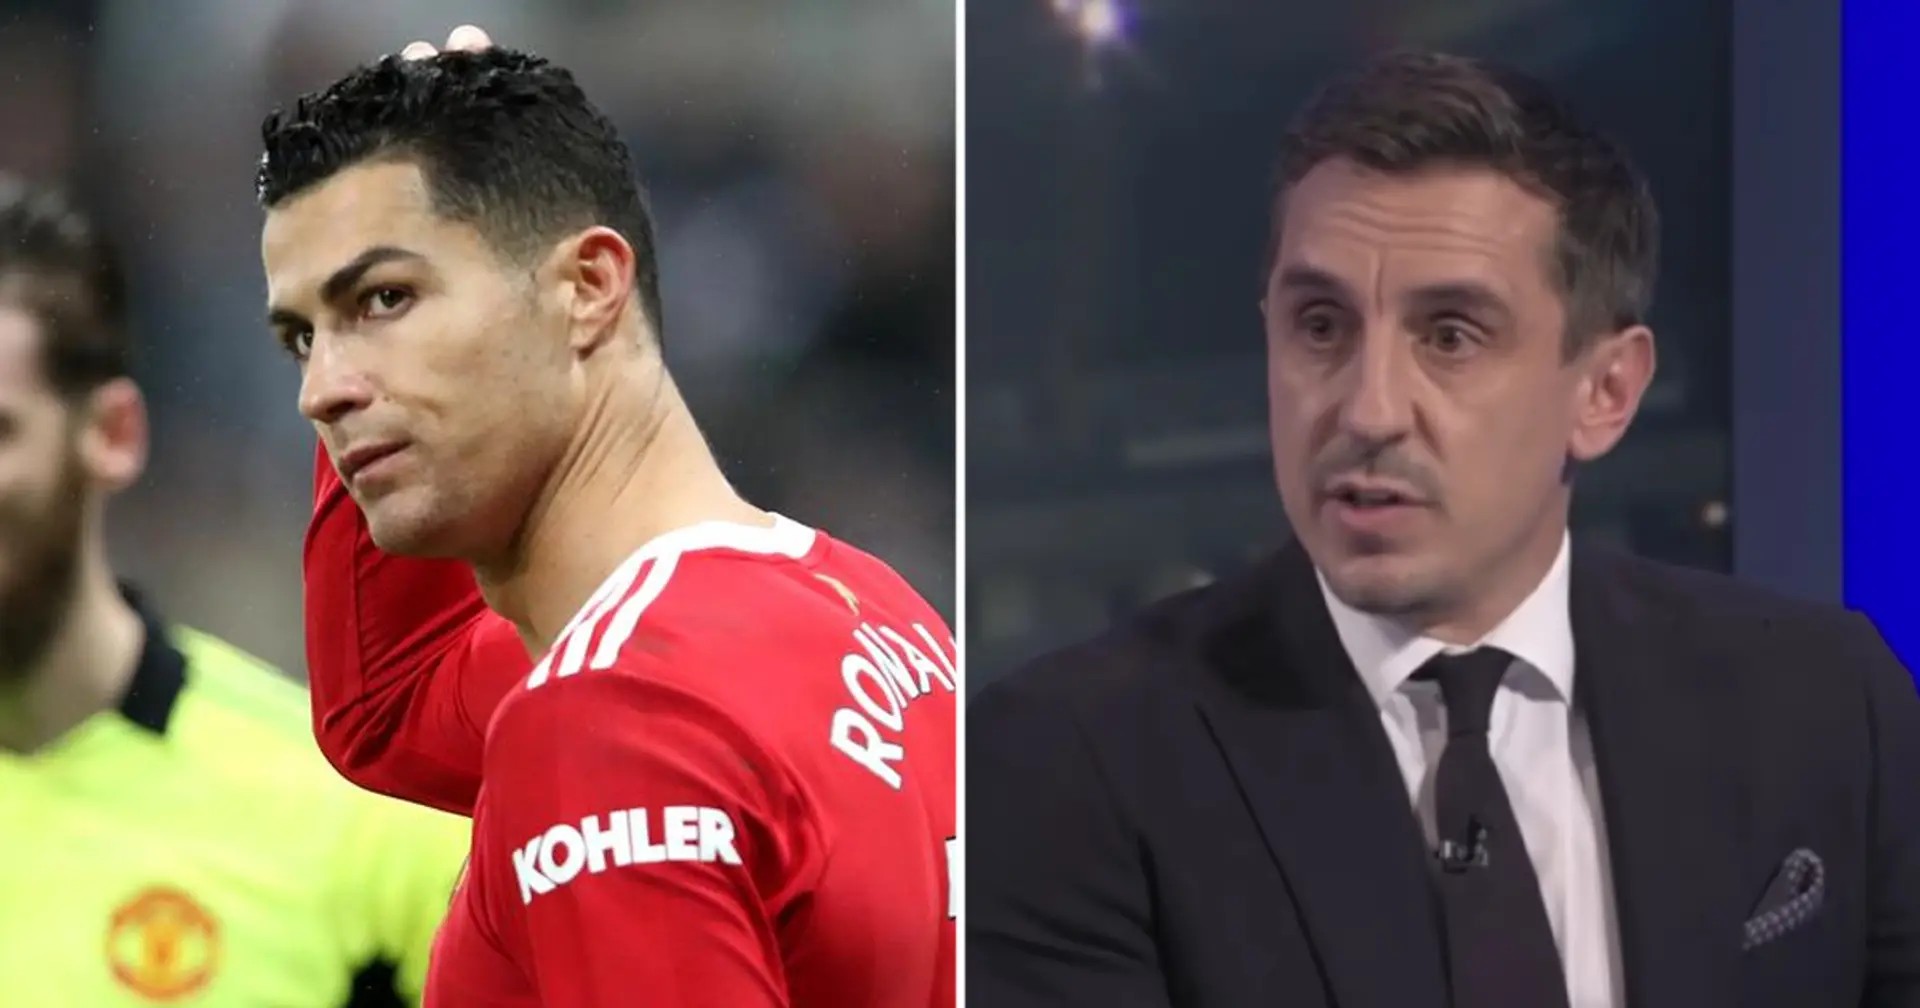 'I love that lad but I'm not having that': Neville hits out at Ronaldo for snubbing United fans after Newcastle draw